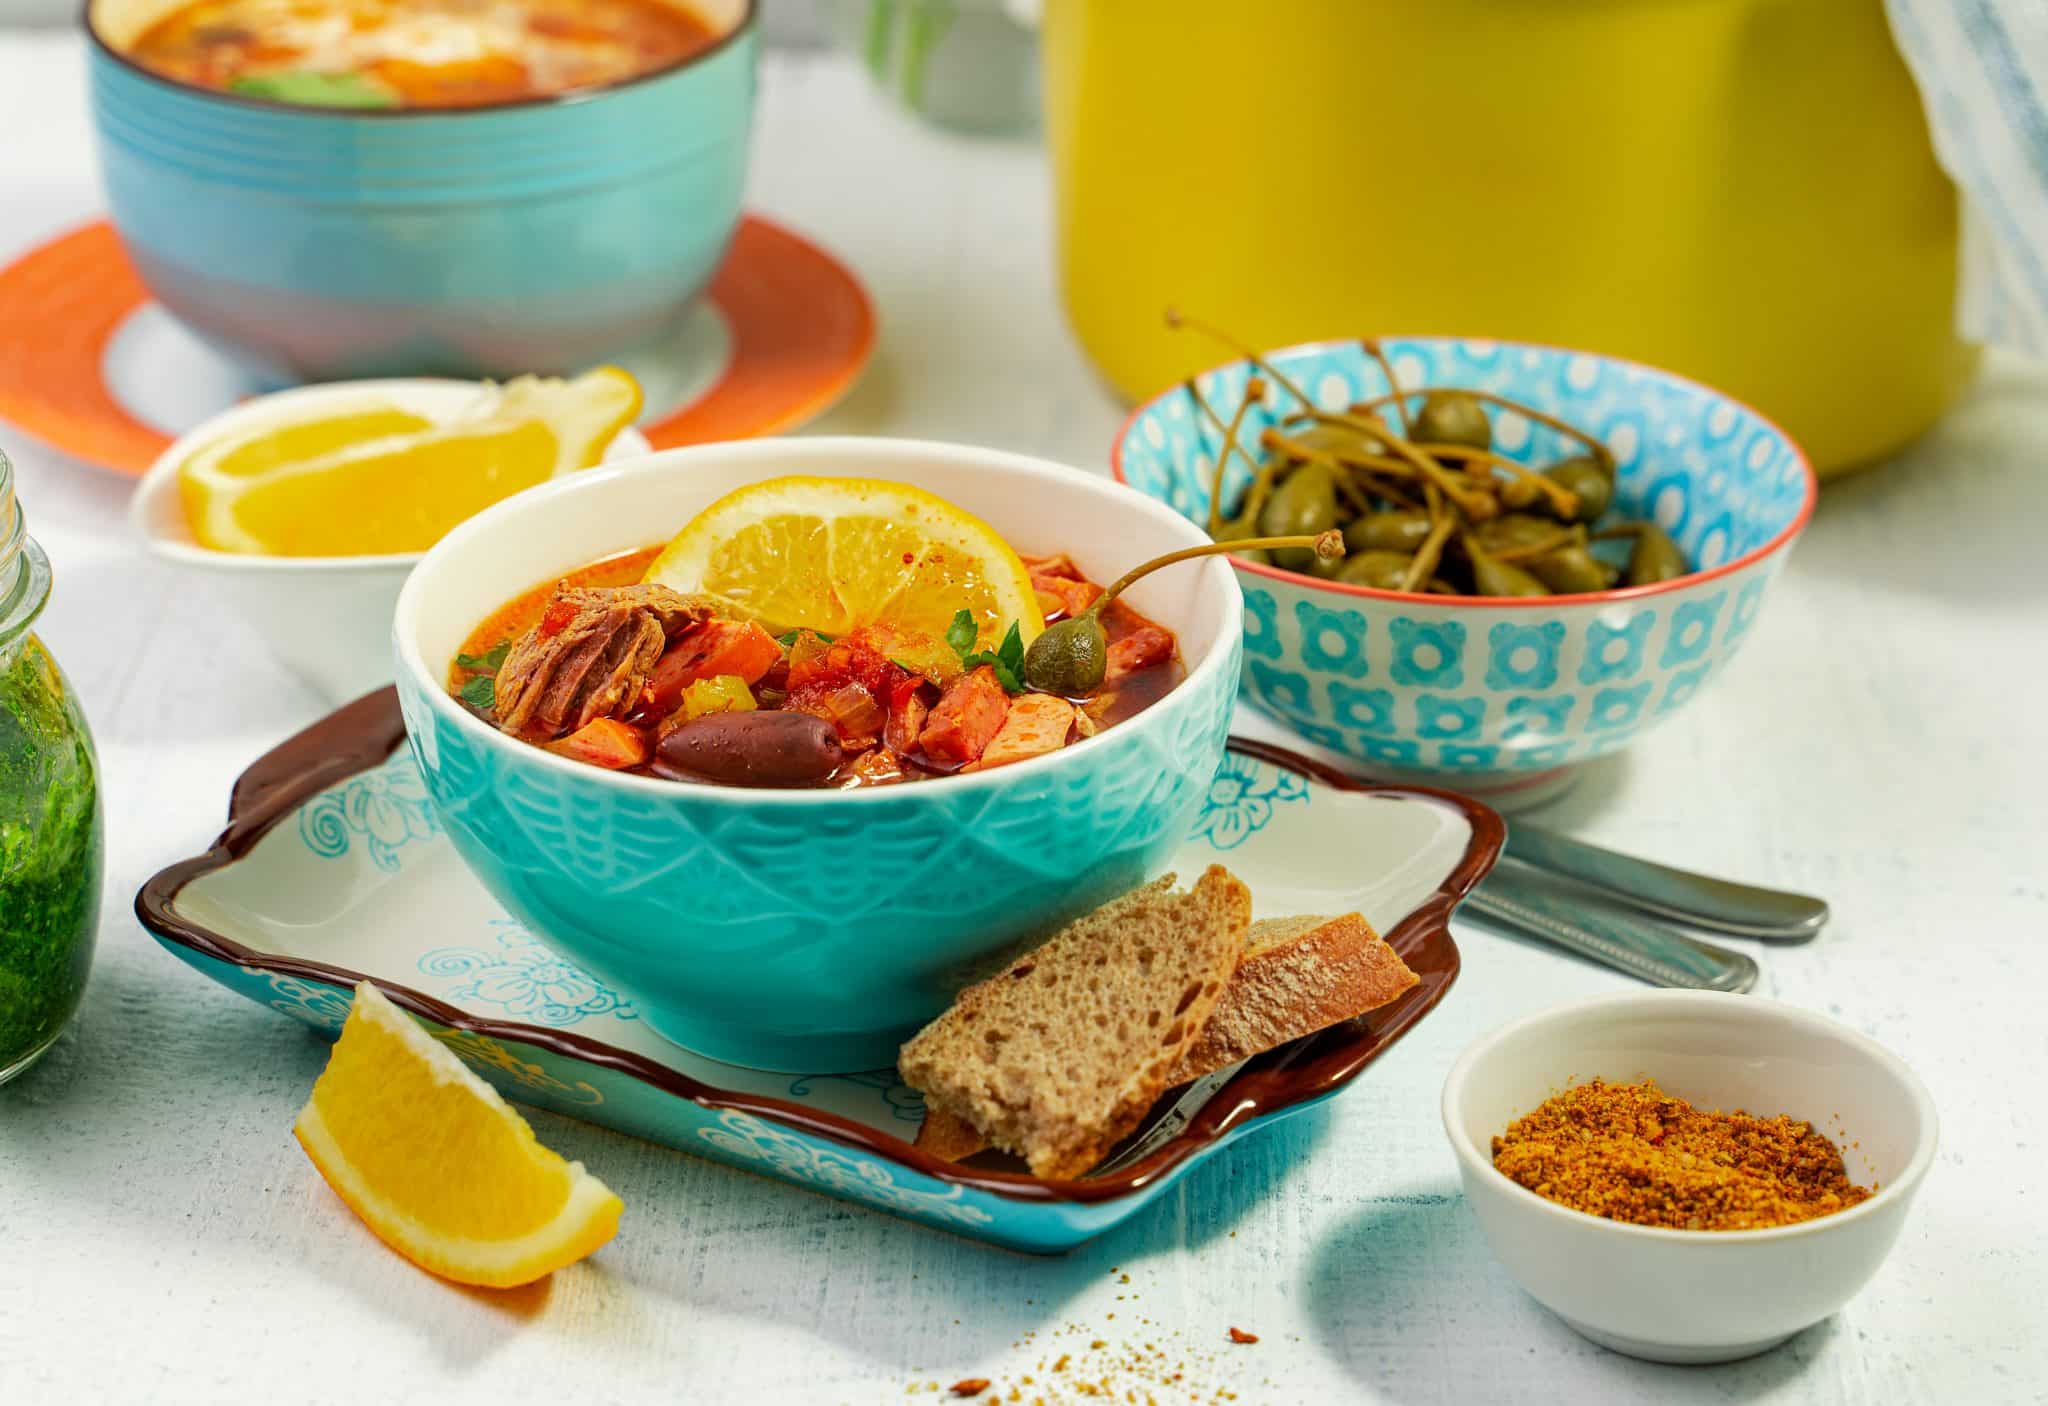 colourful dishes with healthy home-cooked carbs and protein meals